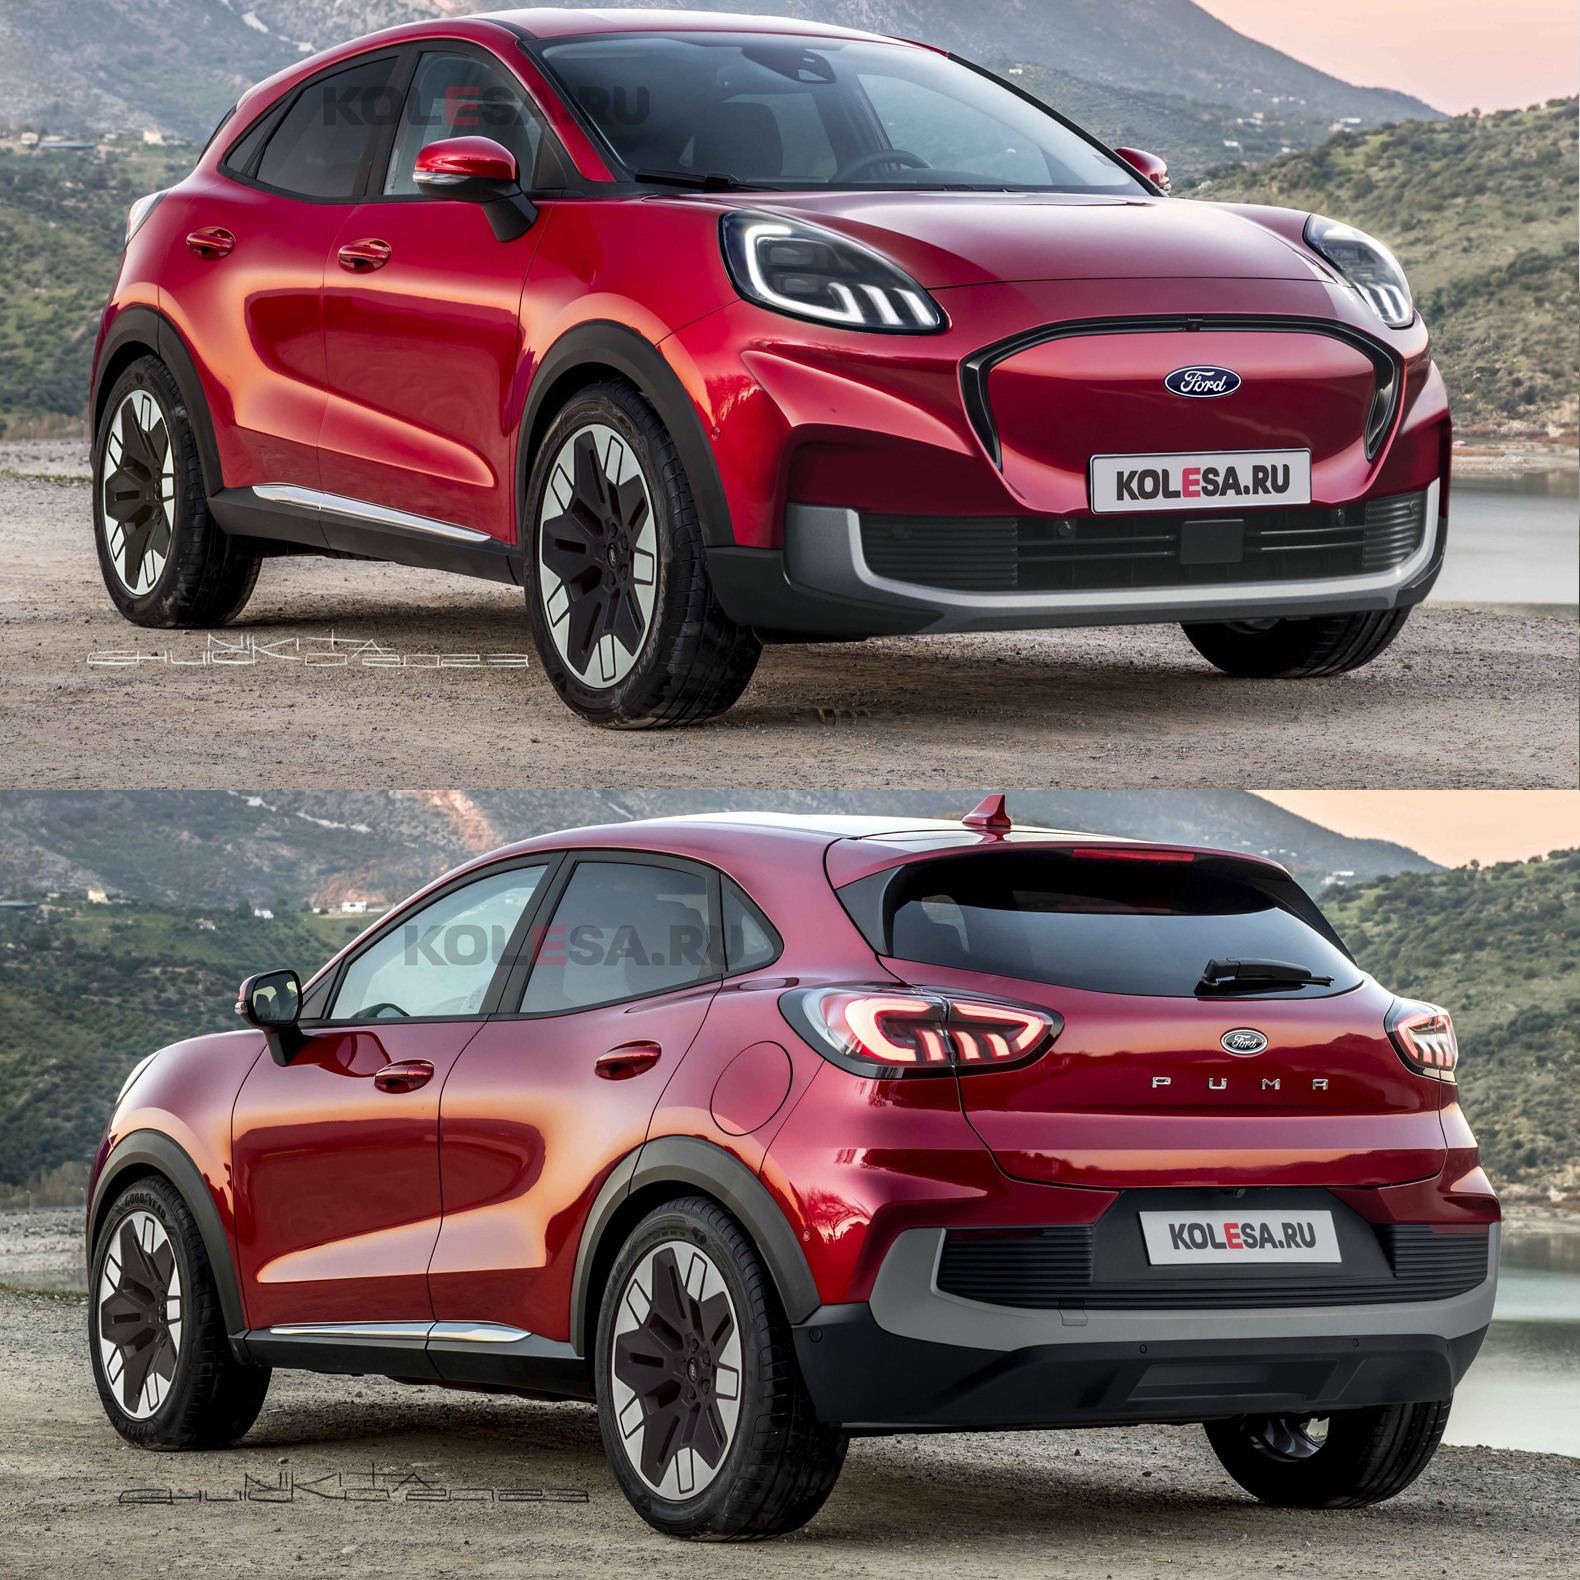 https://s1.cdn.autoevolution.com/images/news/ford-puma-subcompact-crossover-unofficially-gets-an-ev-necessary-mild-cycle-facelift-221886_1.jpg